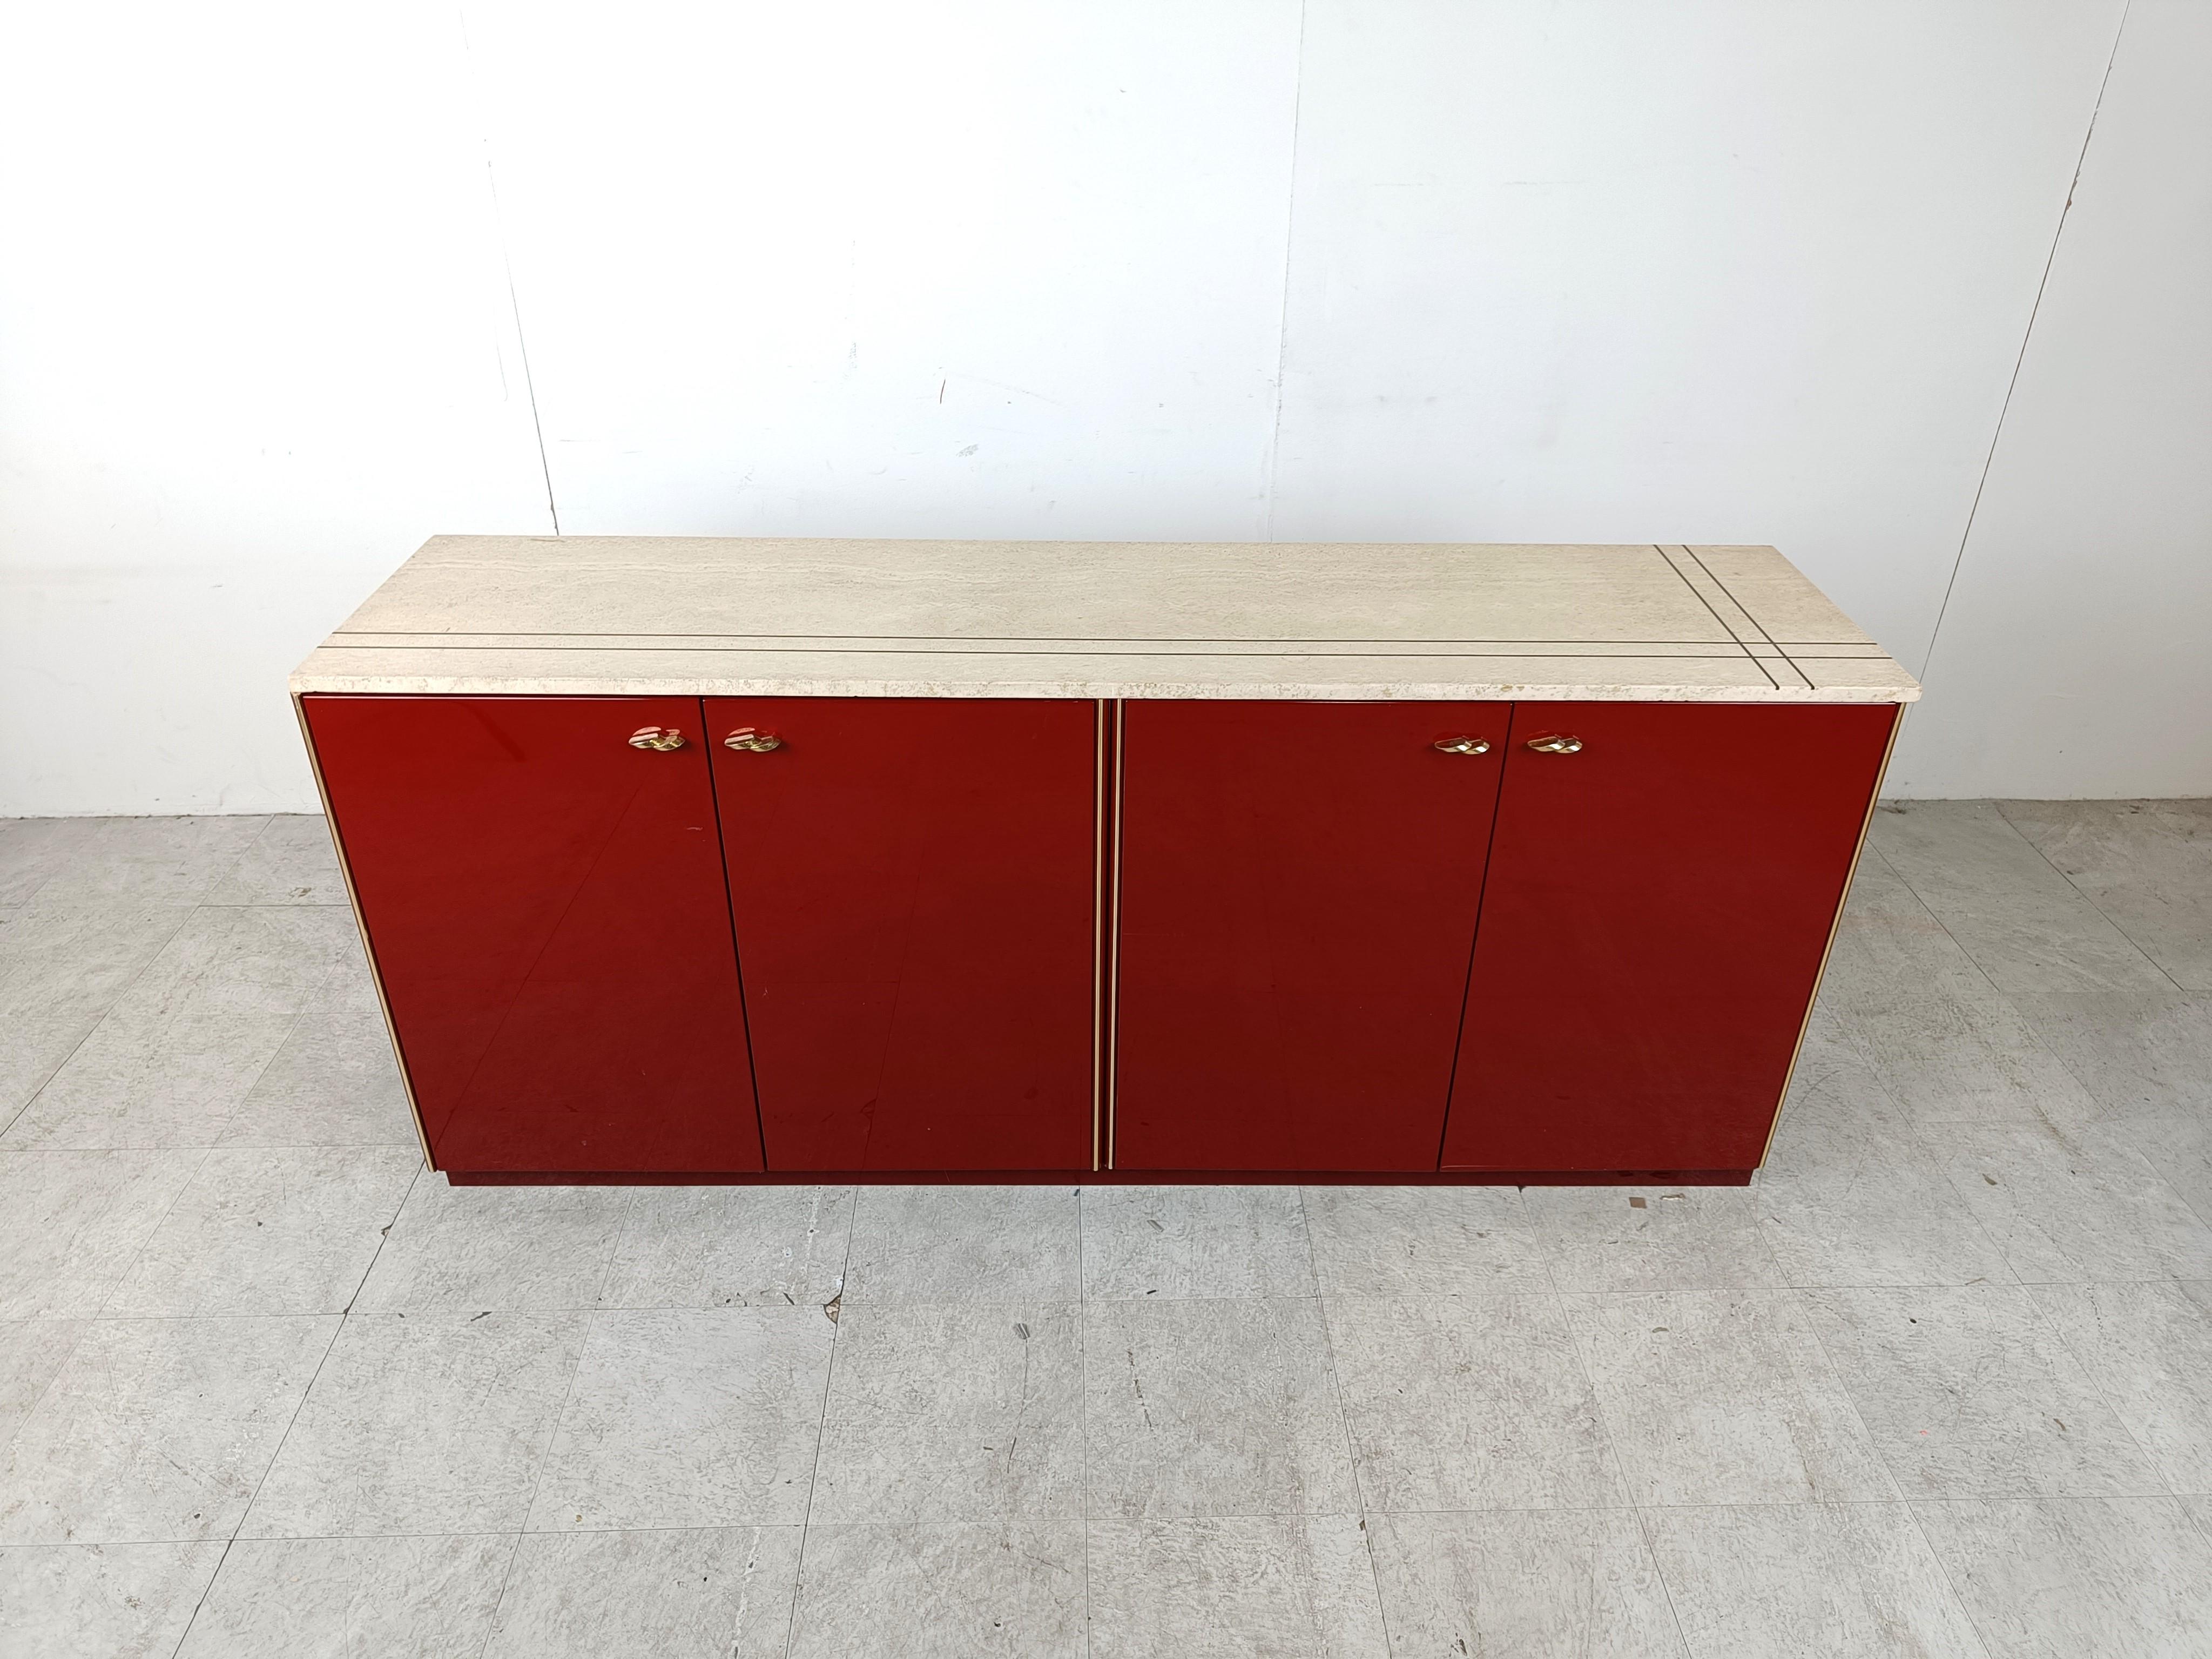 High gloss lacquered sideboard with brass handles and brass framing with a travertine table top.

Nicely inlaid brass into the travertine top.

Beautiful and luxurious piece.

Some nice patina on the handles, good overall condition

1980s -